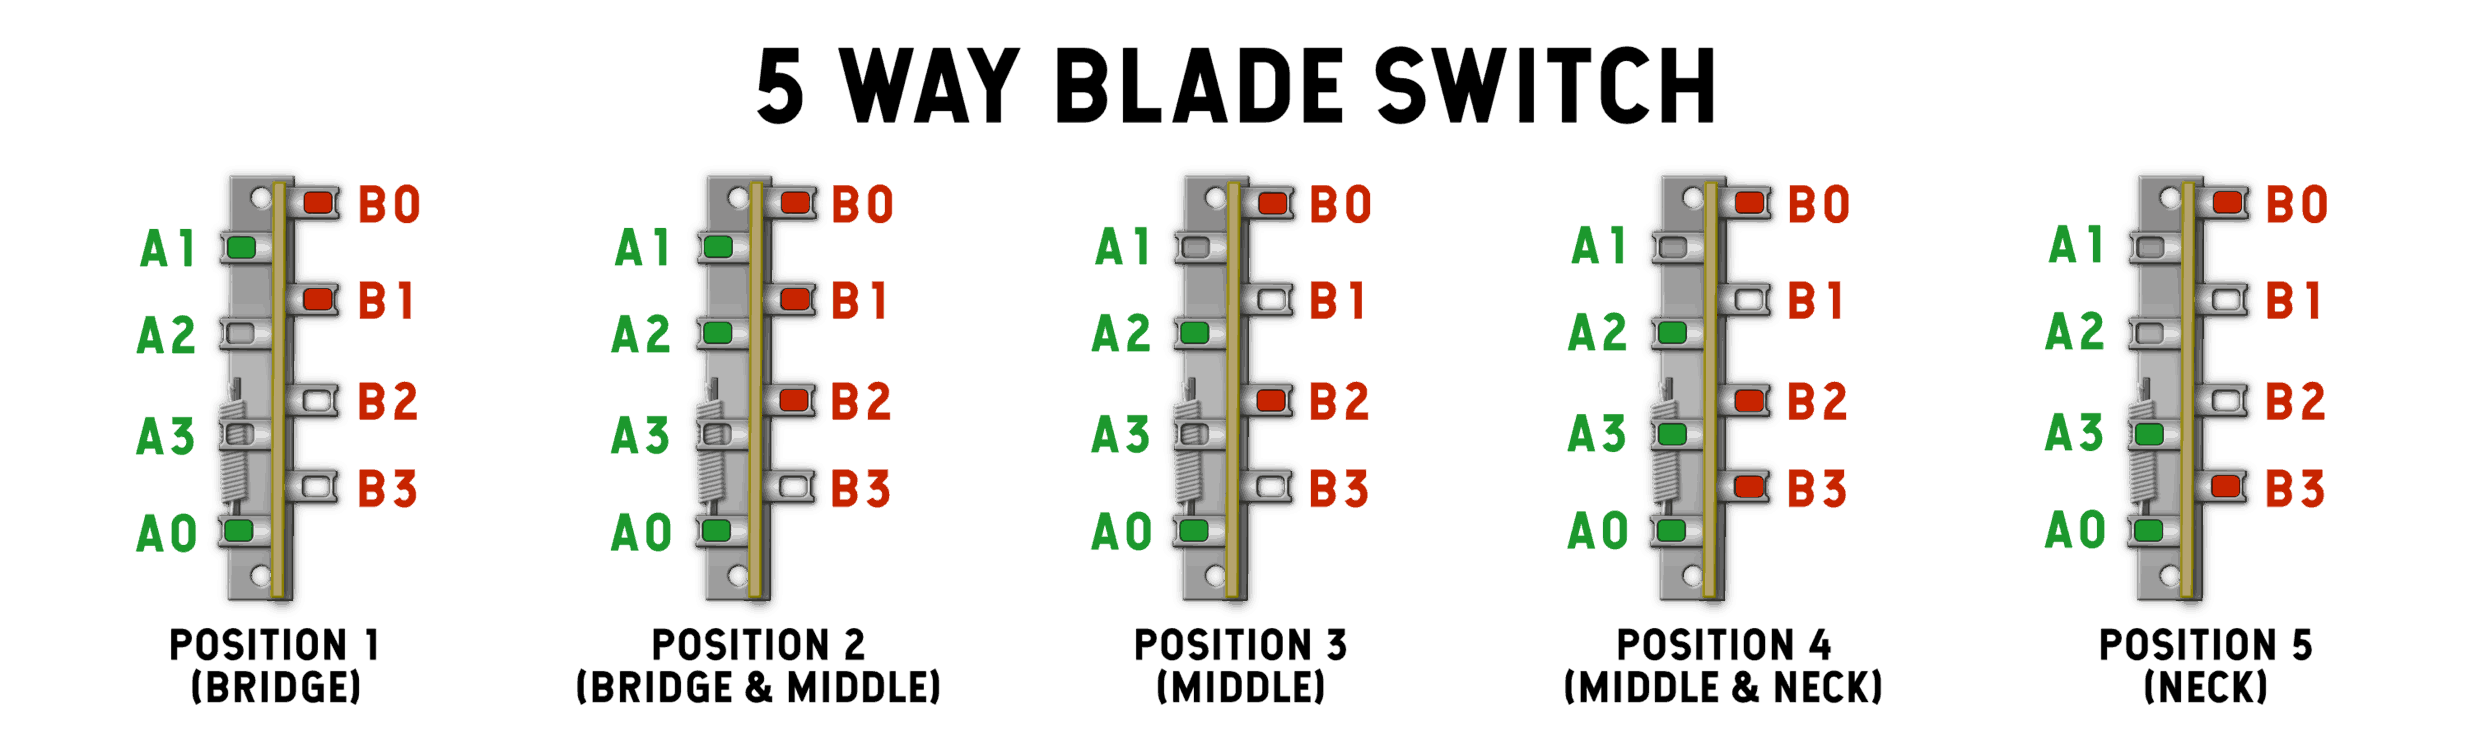 How A 5 Way Blade Switch Works